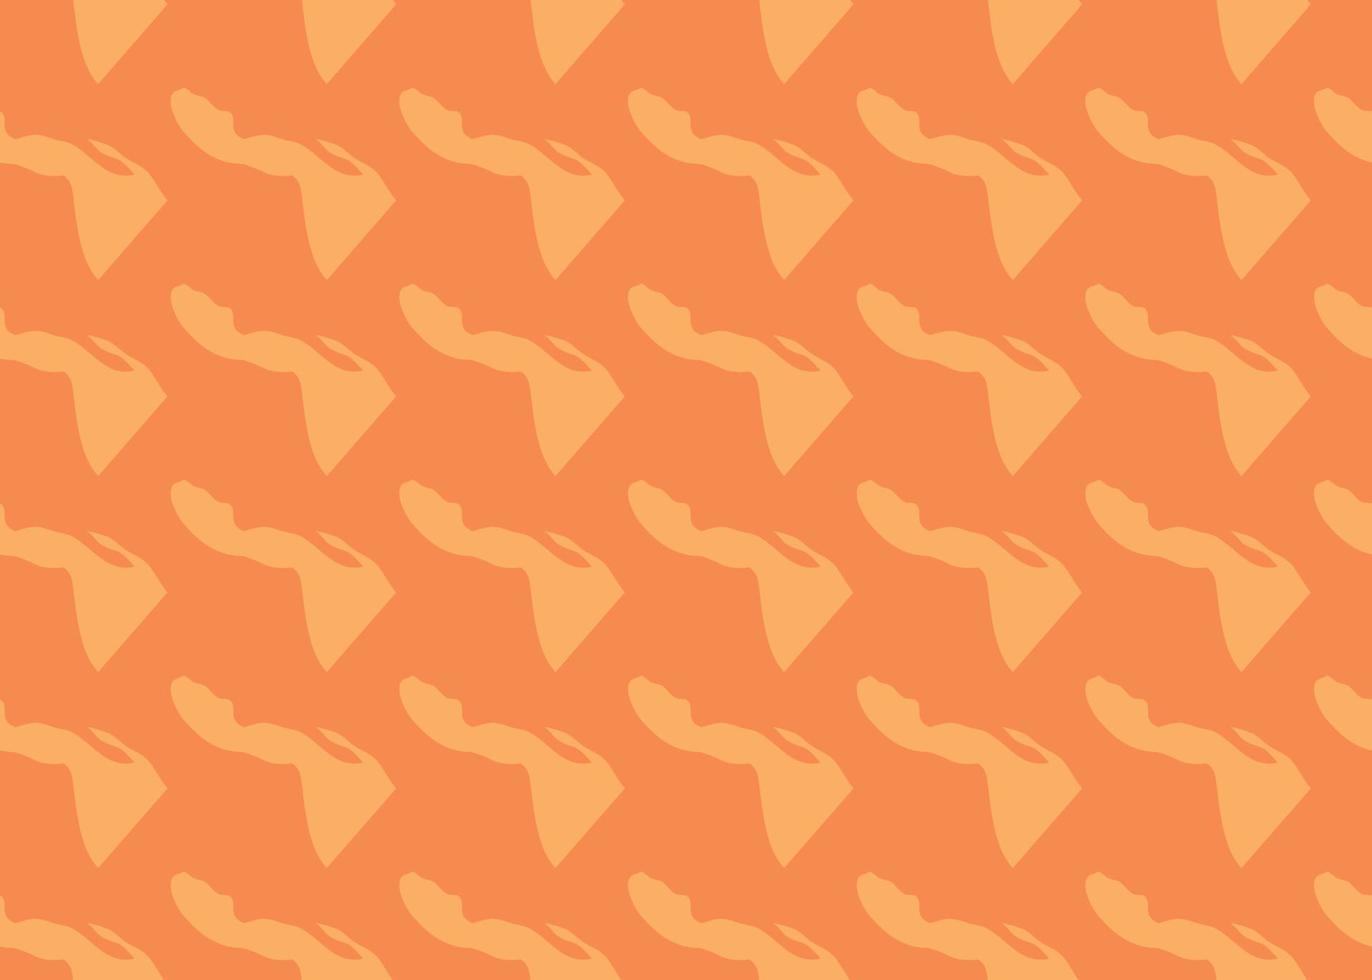 Hand drawn, orange color shapes seamless pattern vector